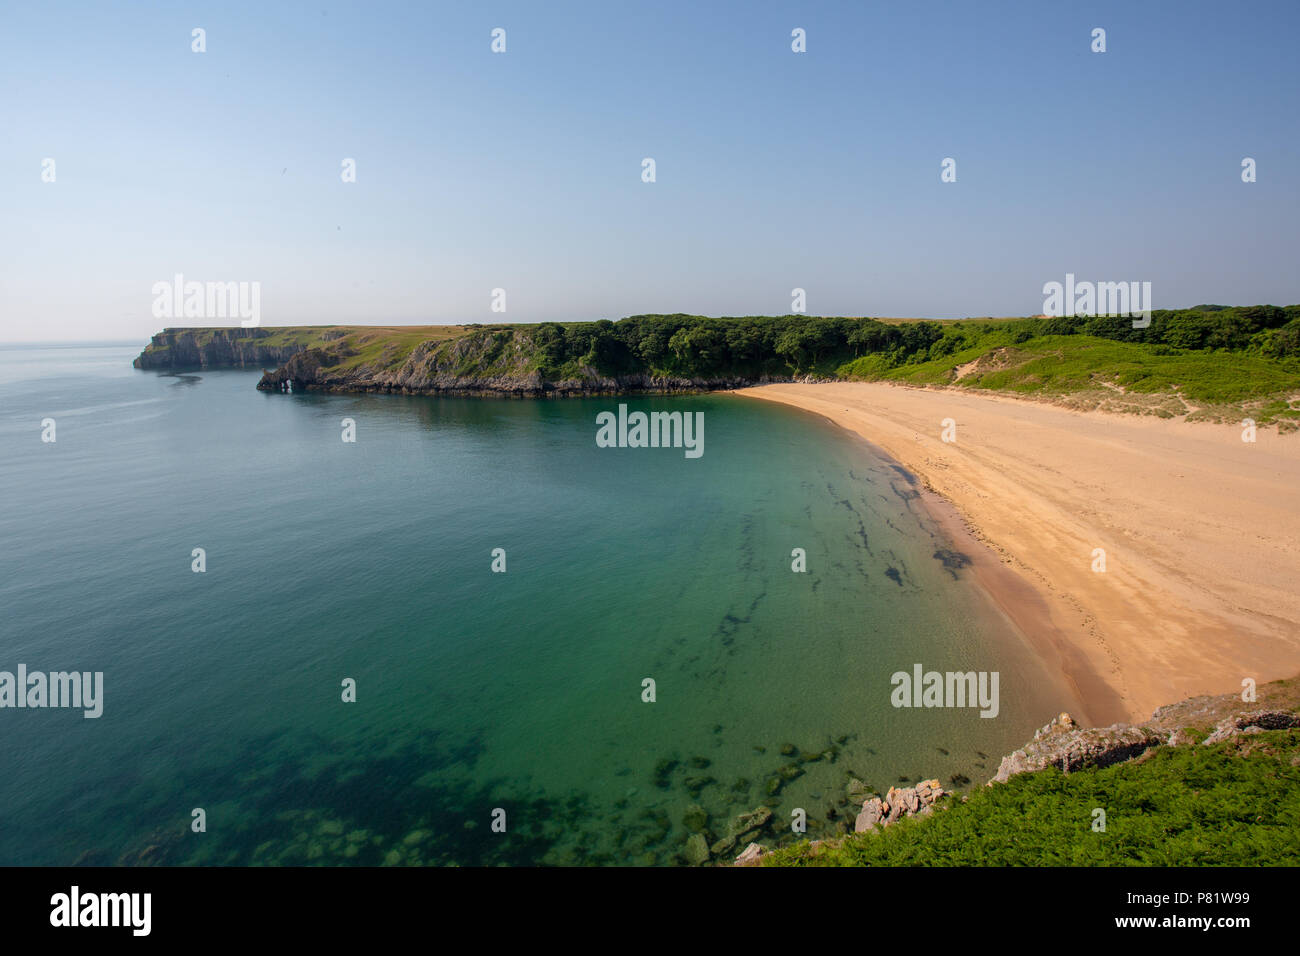 Barafundle Bay beach in Pembrokeshire, South Wales, UK Stock Photo